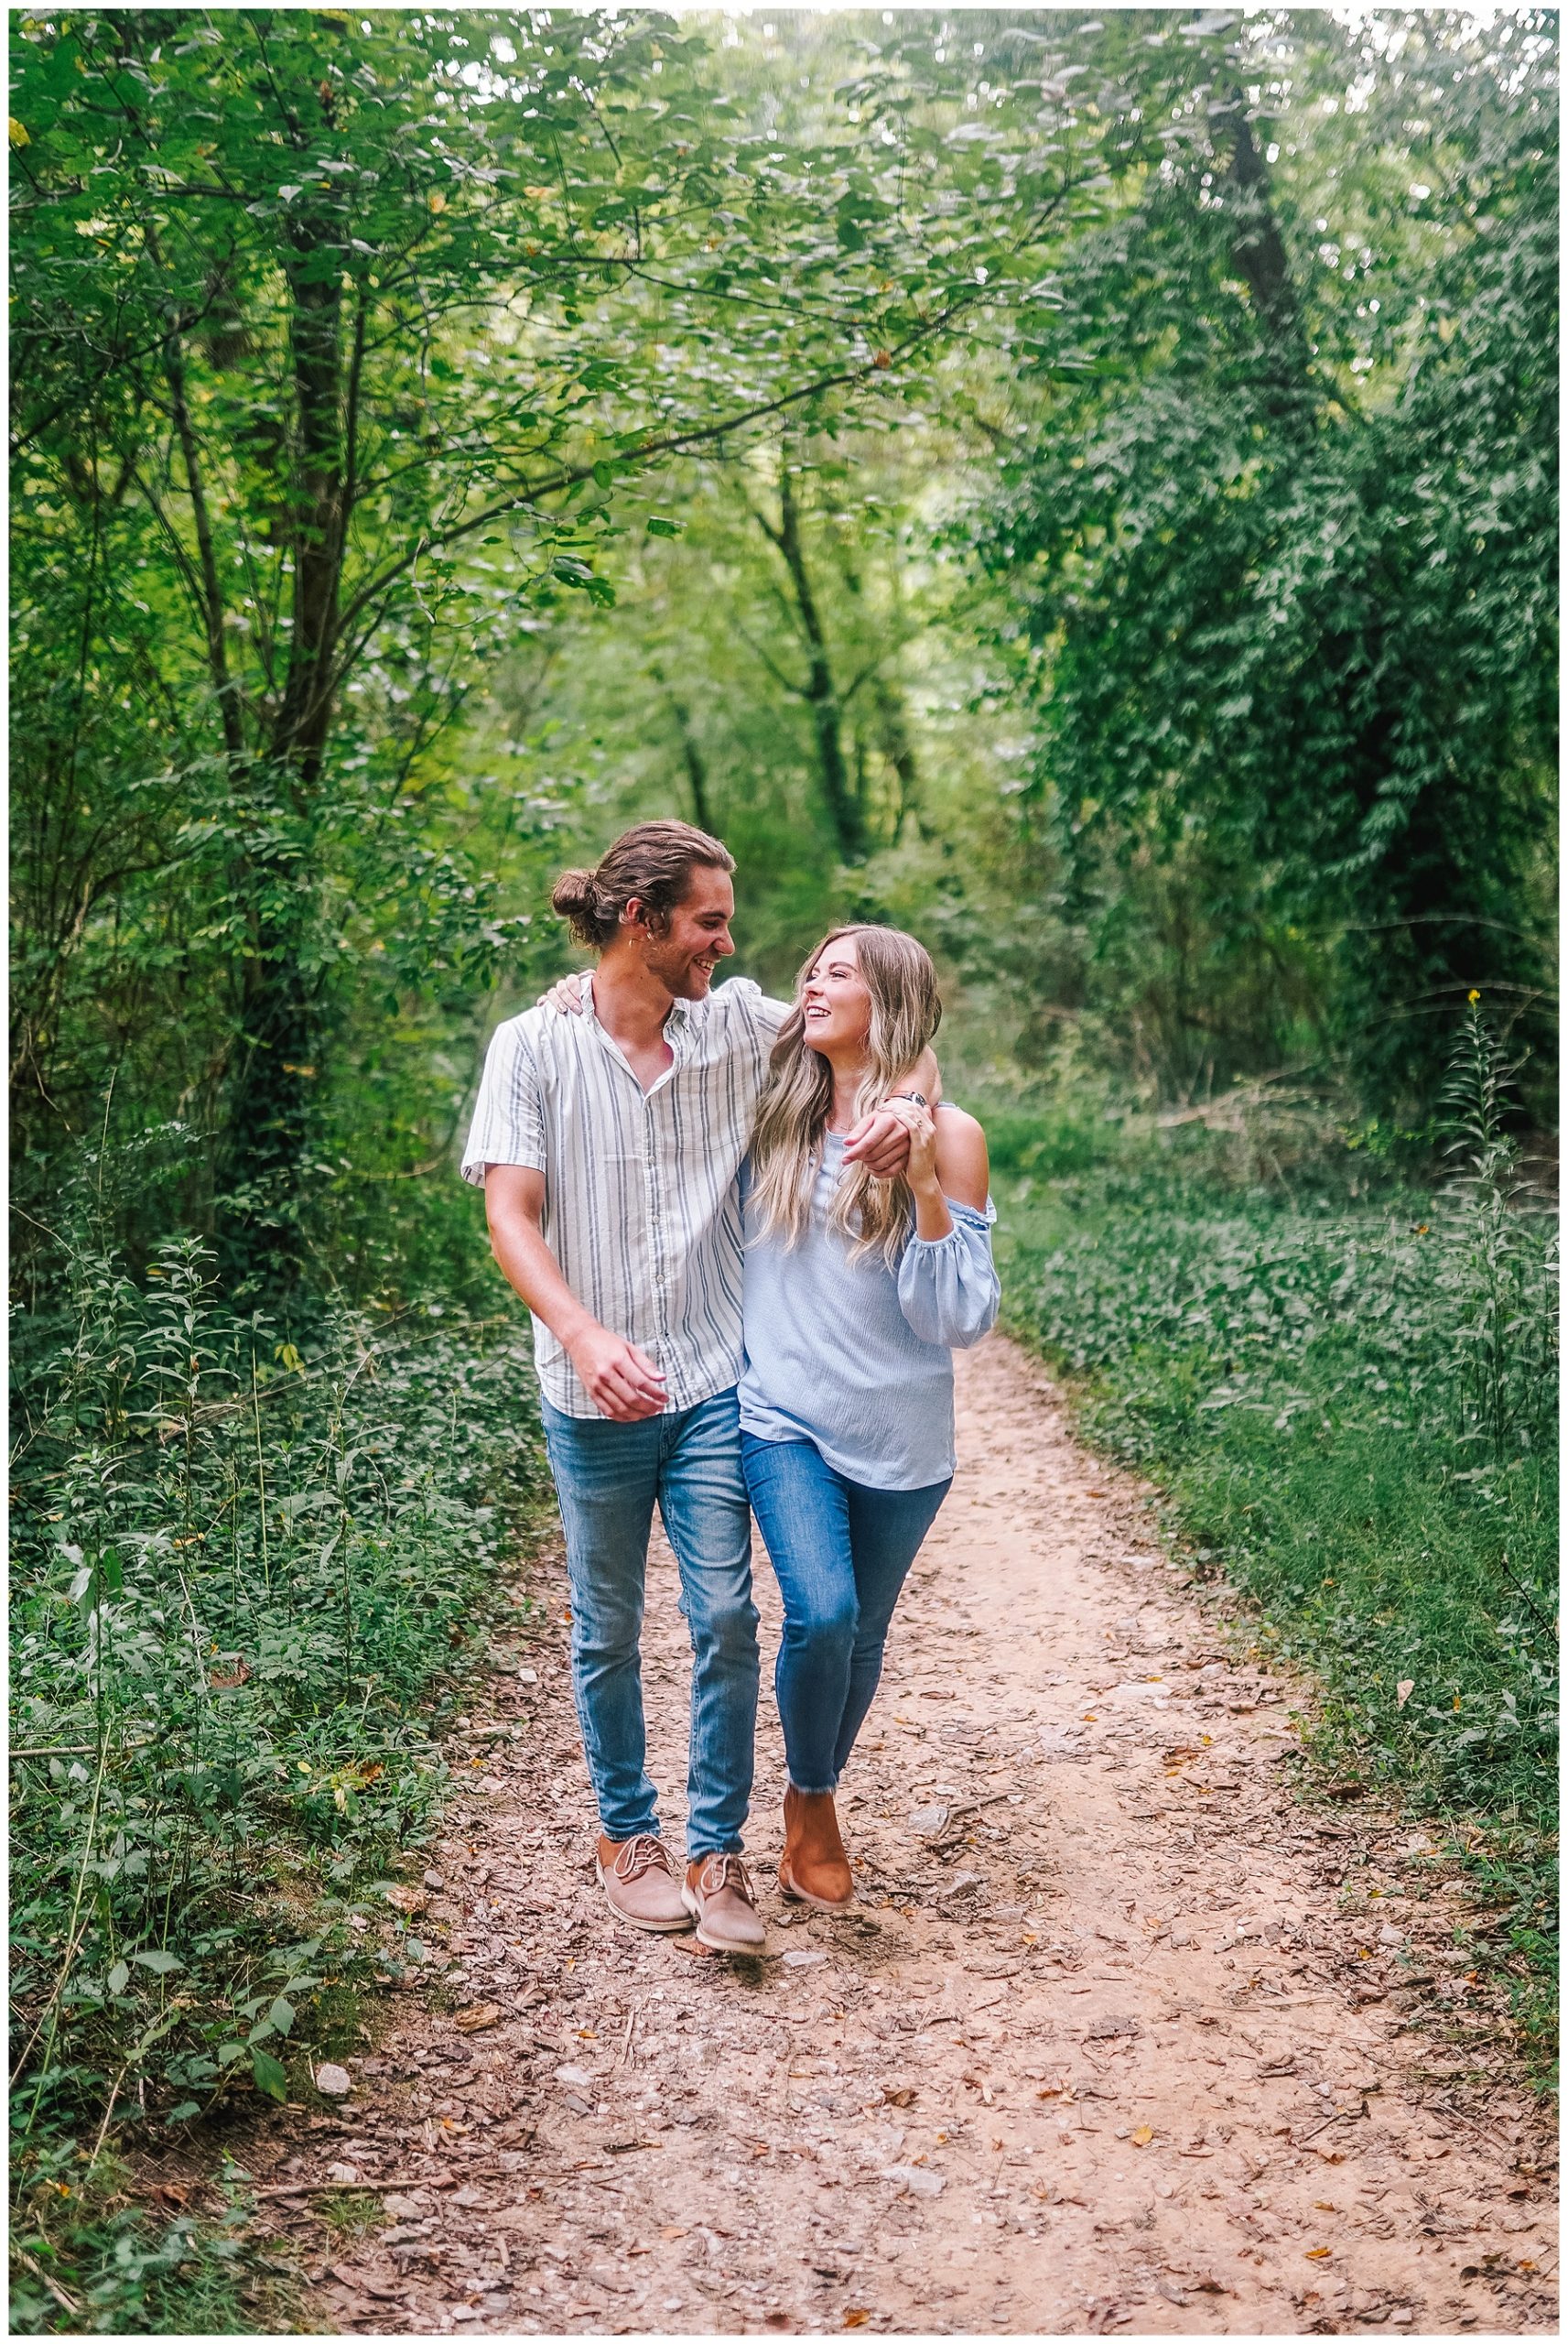 happy couple walking through a wooded forest in the Smoky Mountains with the mans arm around the girl